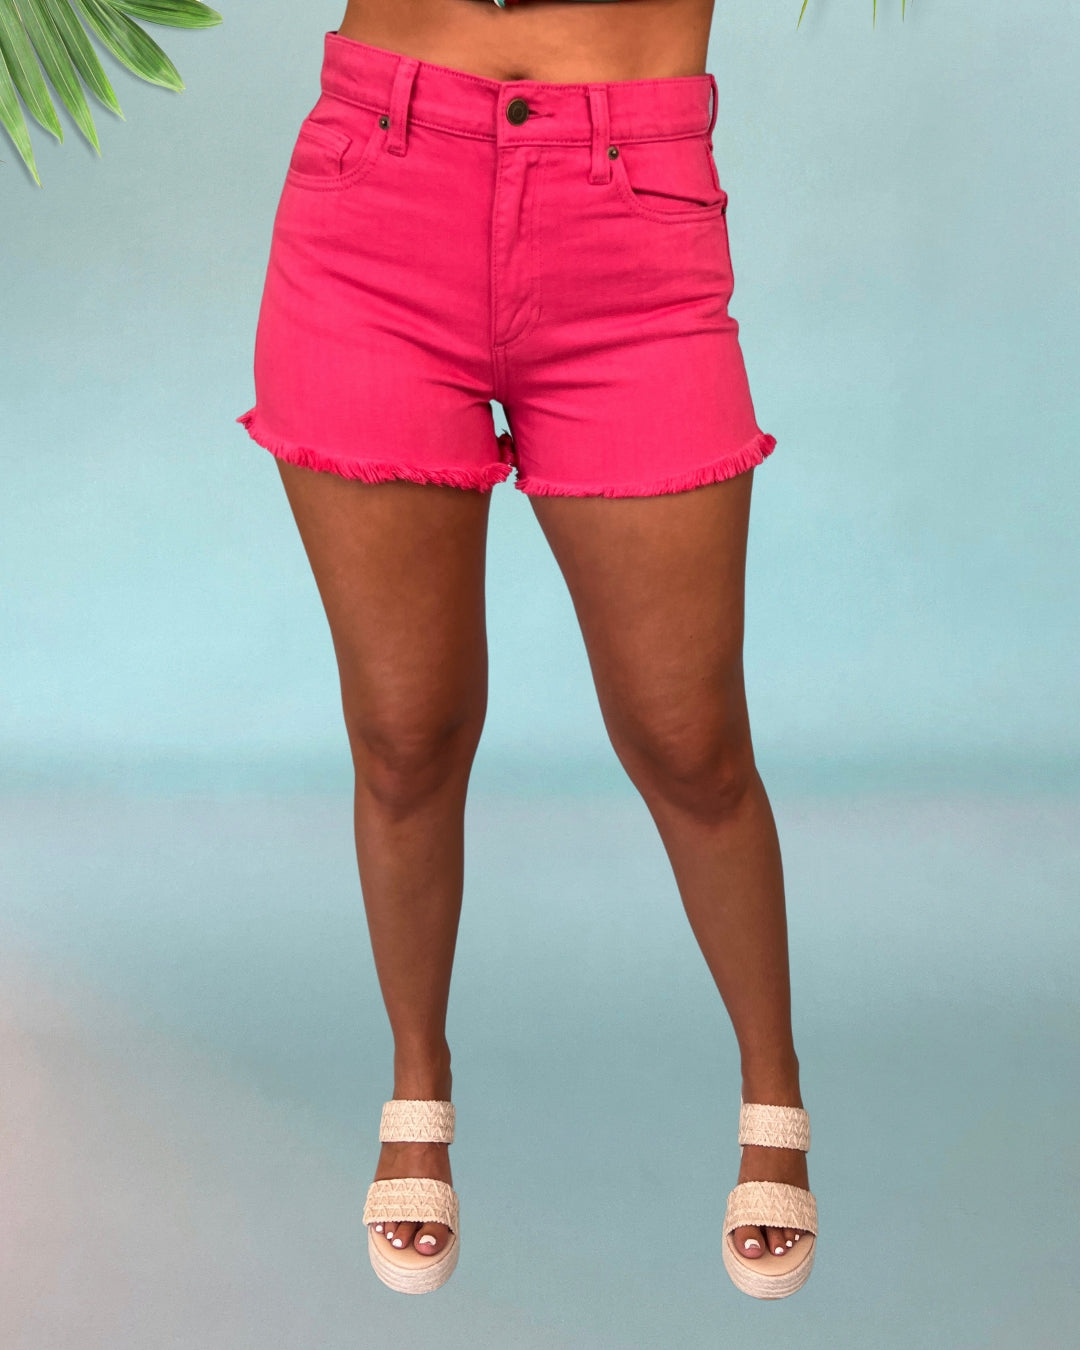 Find Out Where To Get The Pants  Neon outfits, Neon fashion, Cute outfits